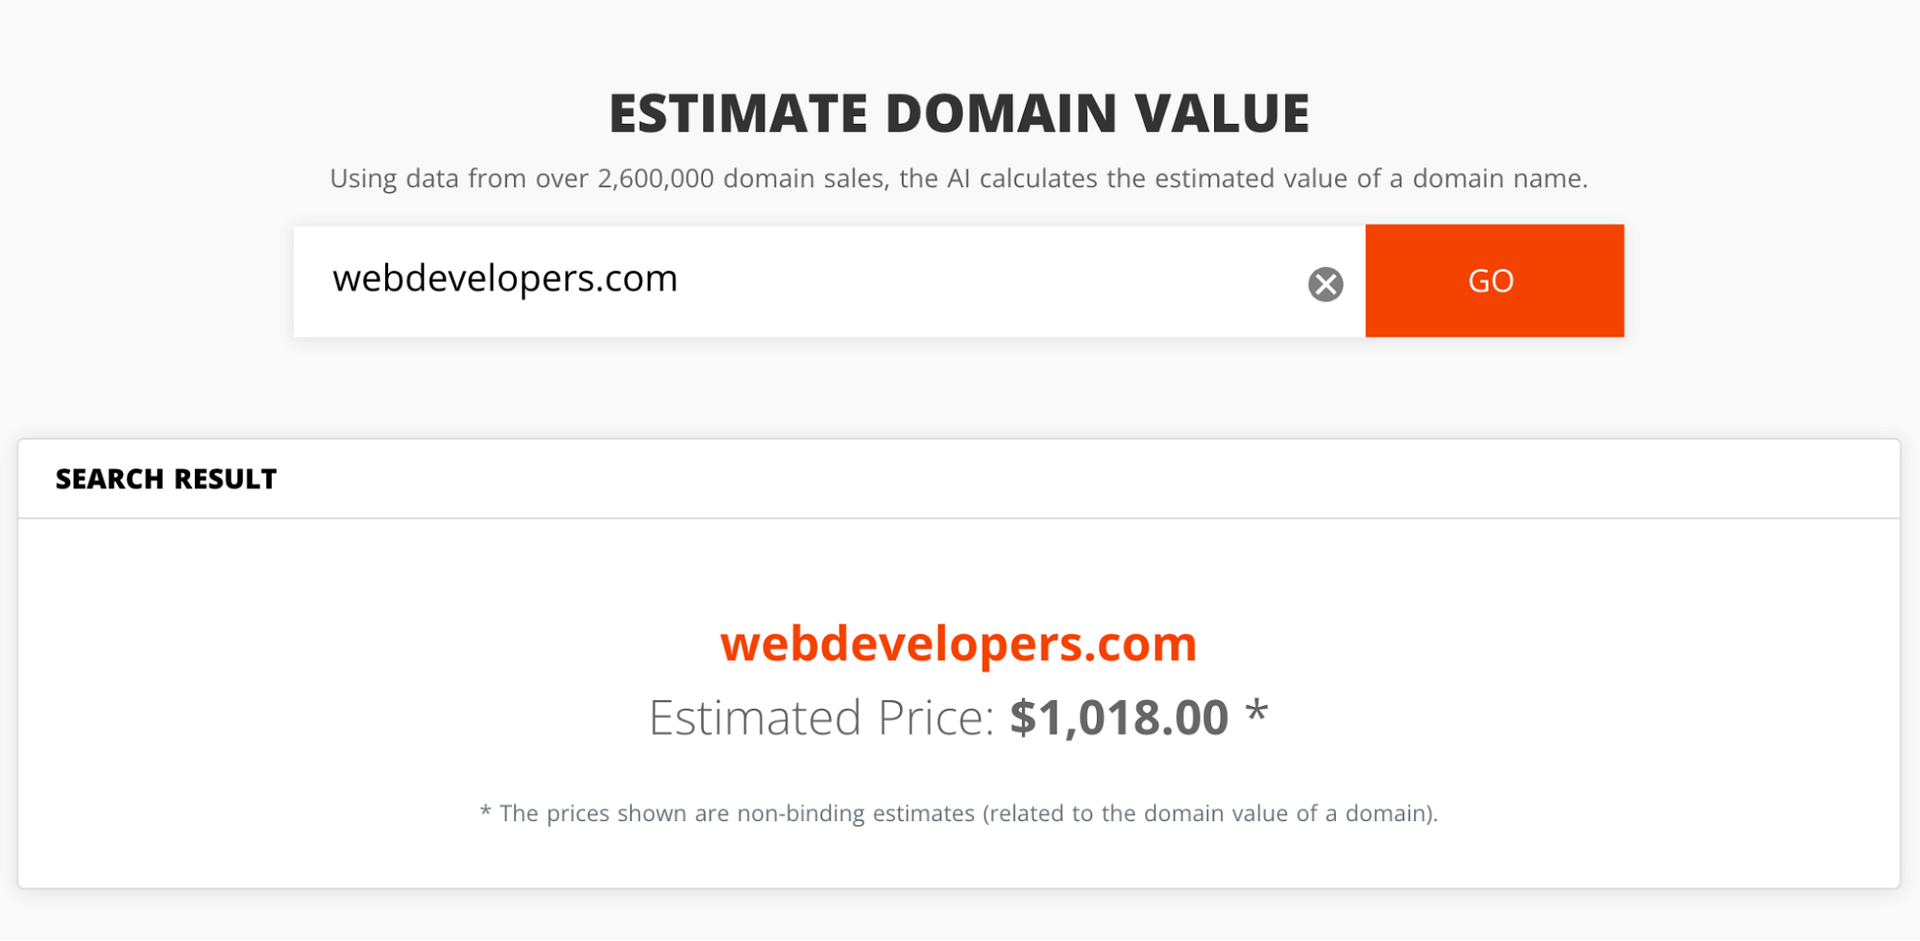 How much “webdevelopers.com” costs.